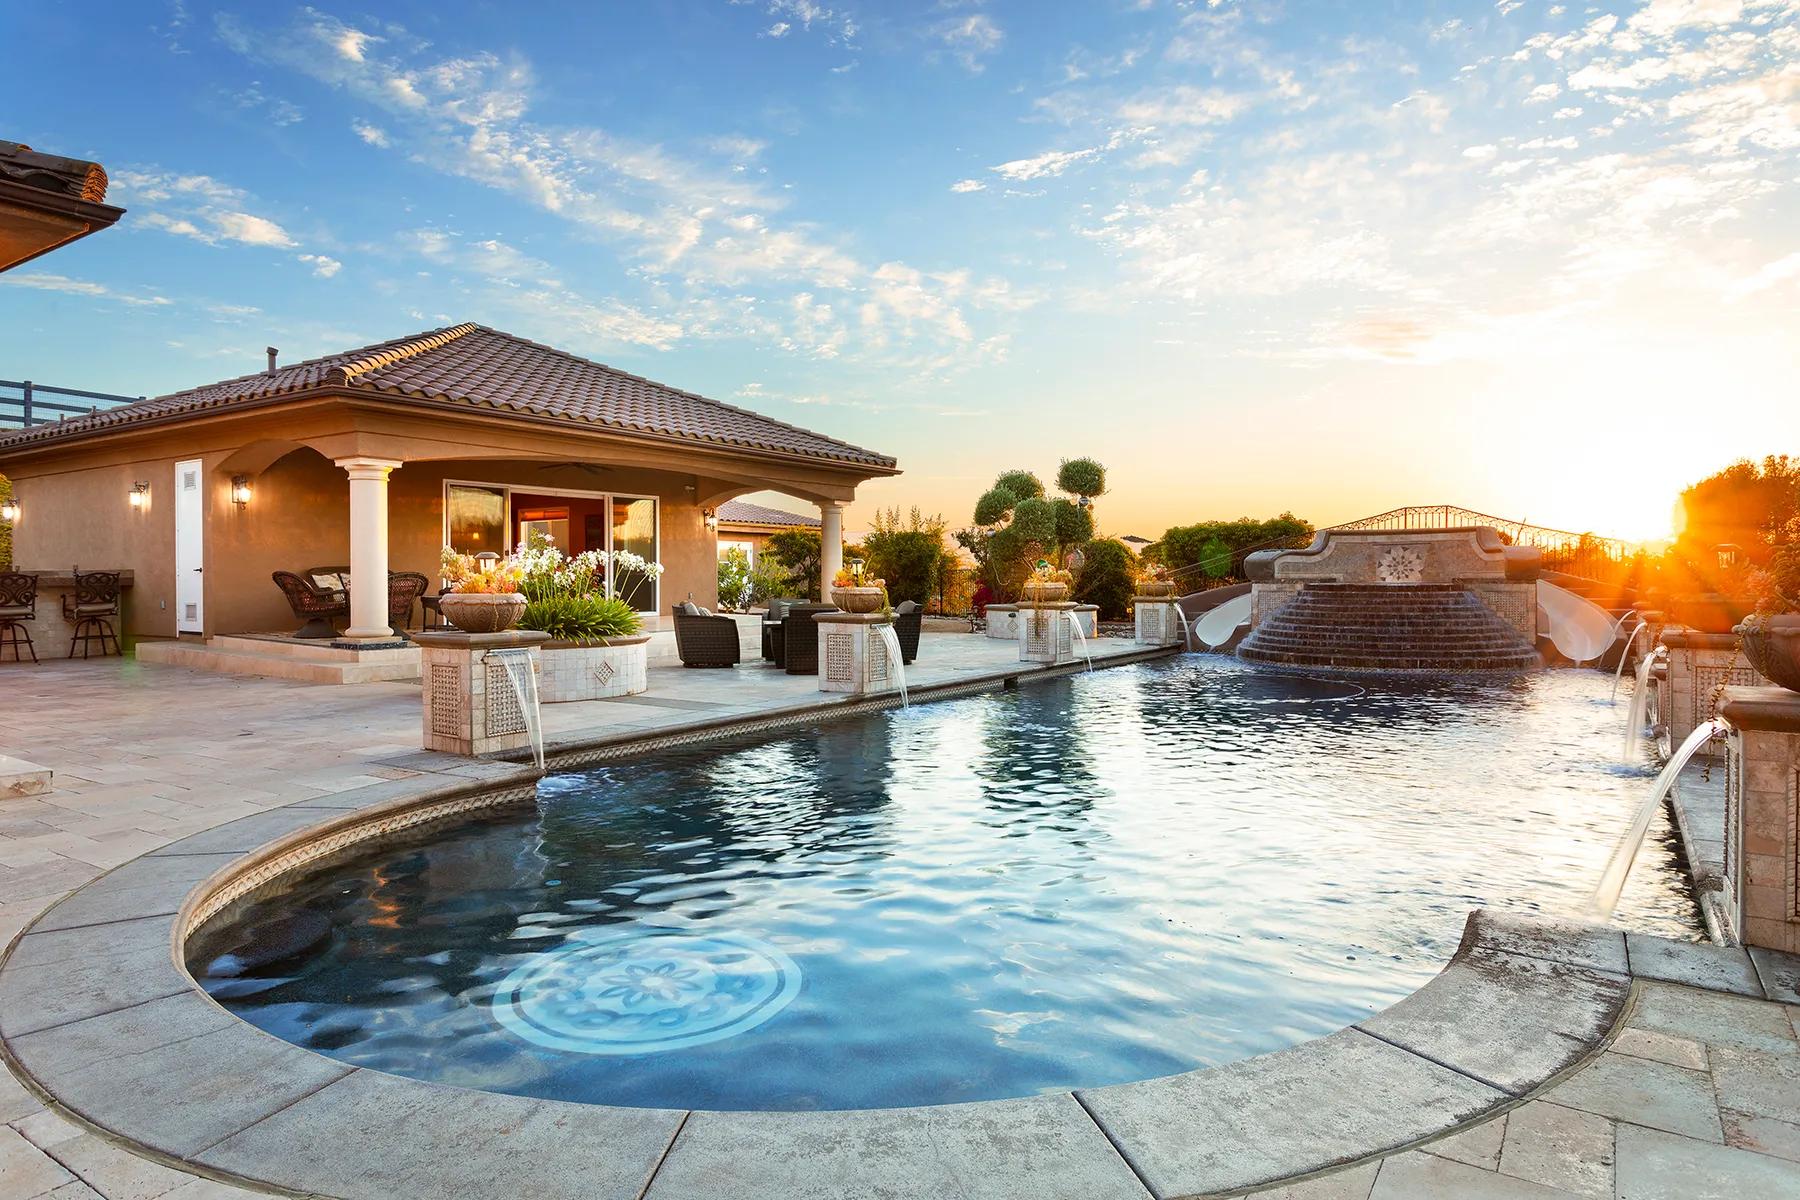 Find Luxury Real Estate in Southern California | Corcoran Global Living